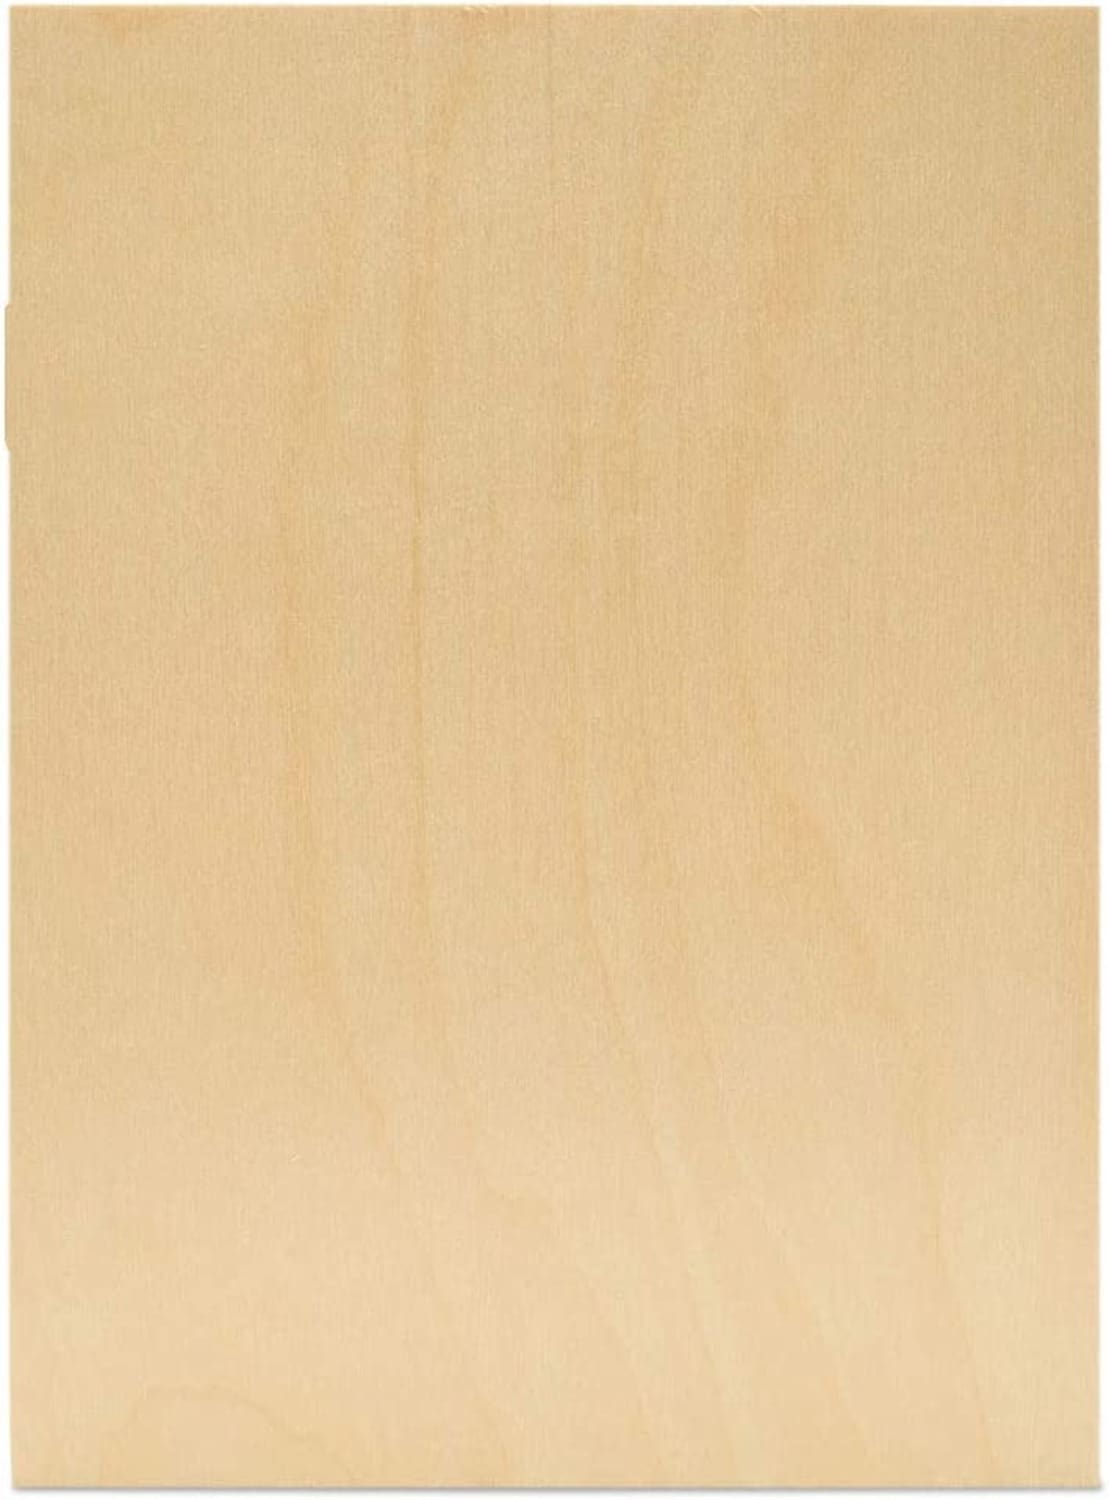 Woodpeckers Crafts Baltic Birch Plywood, 3 Mm 1/8 X 6 In. Craft Wood- Pack  Of 8 B/bb in the Craft Supplies department at